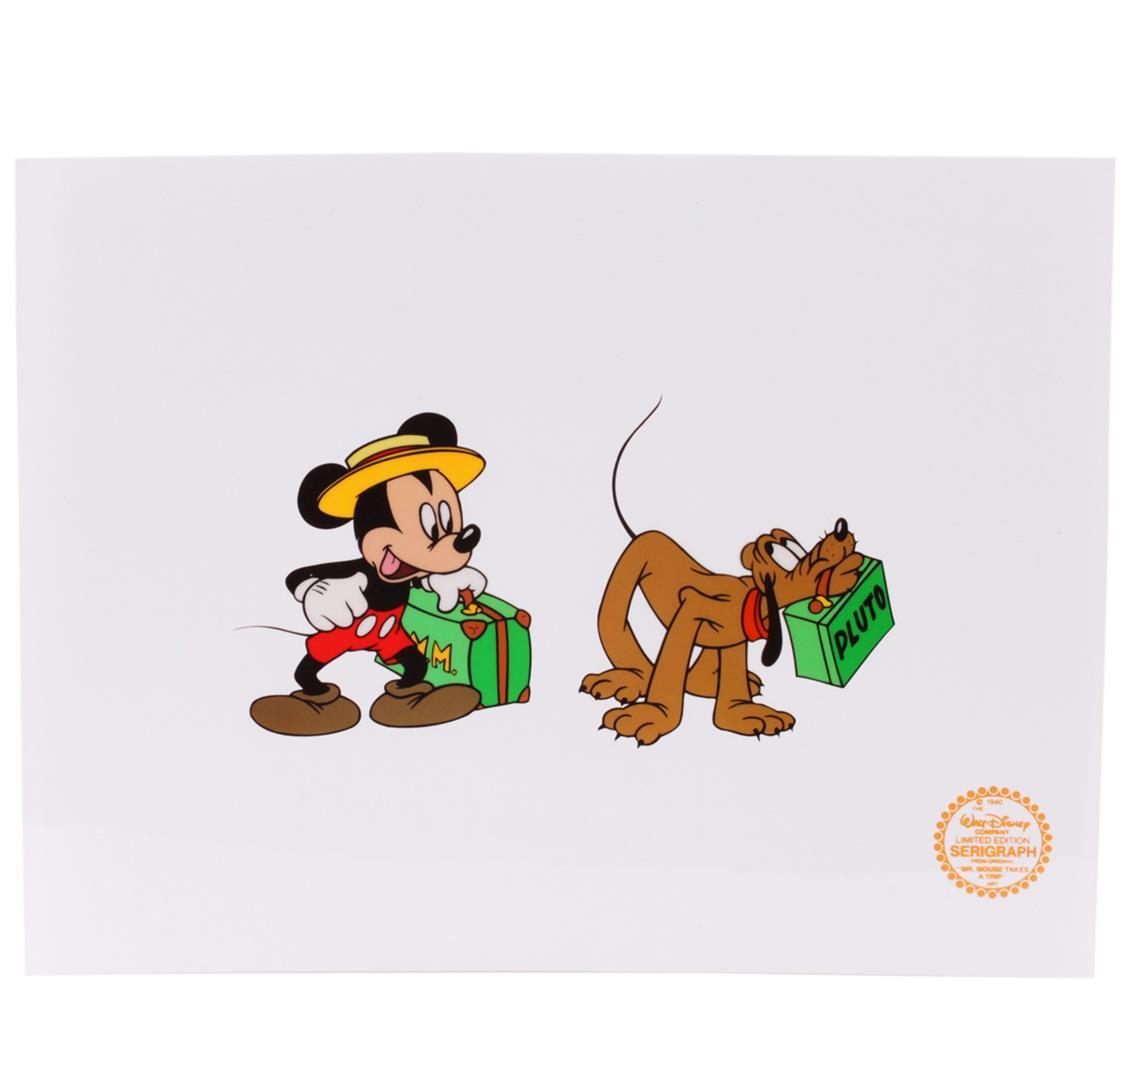 Mr. Mouse Takes A Trip by The Walt Disney Company Limited Edition Serigraph